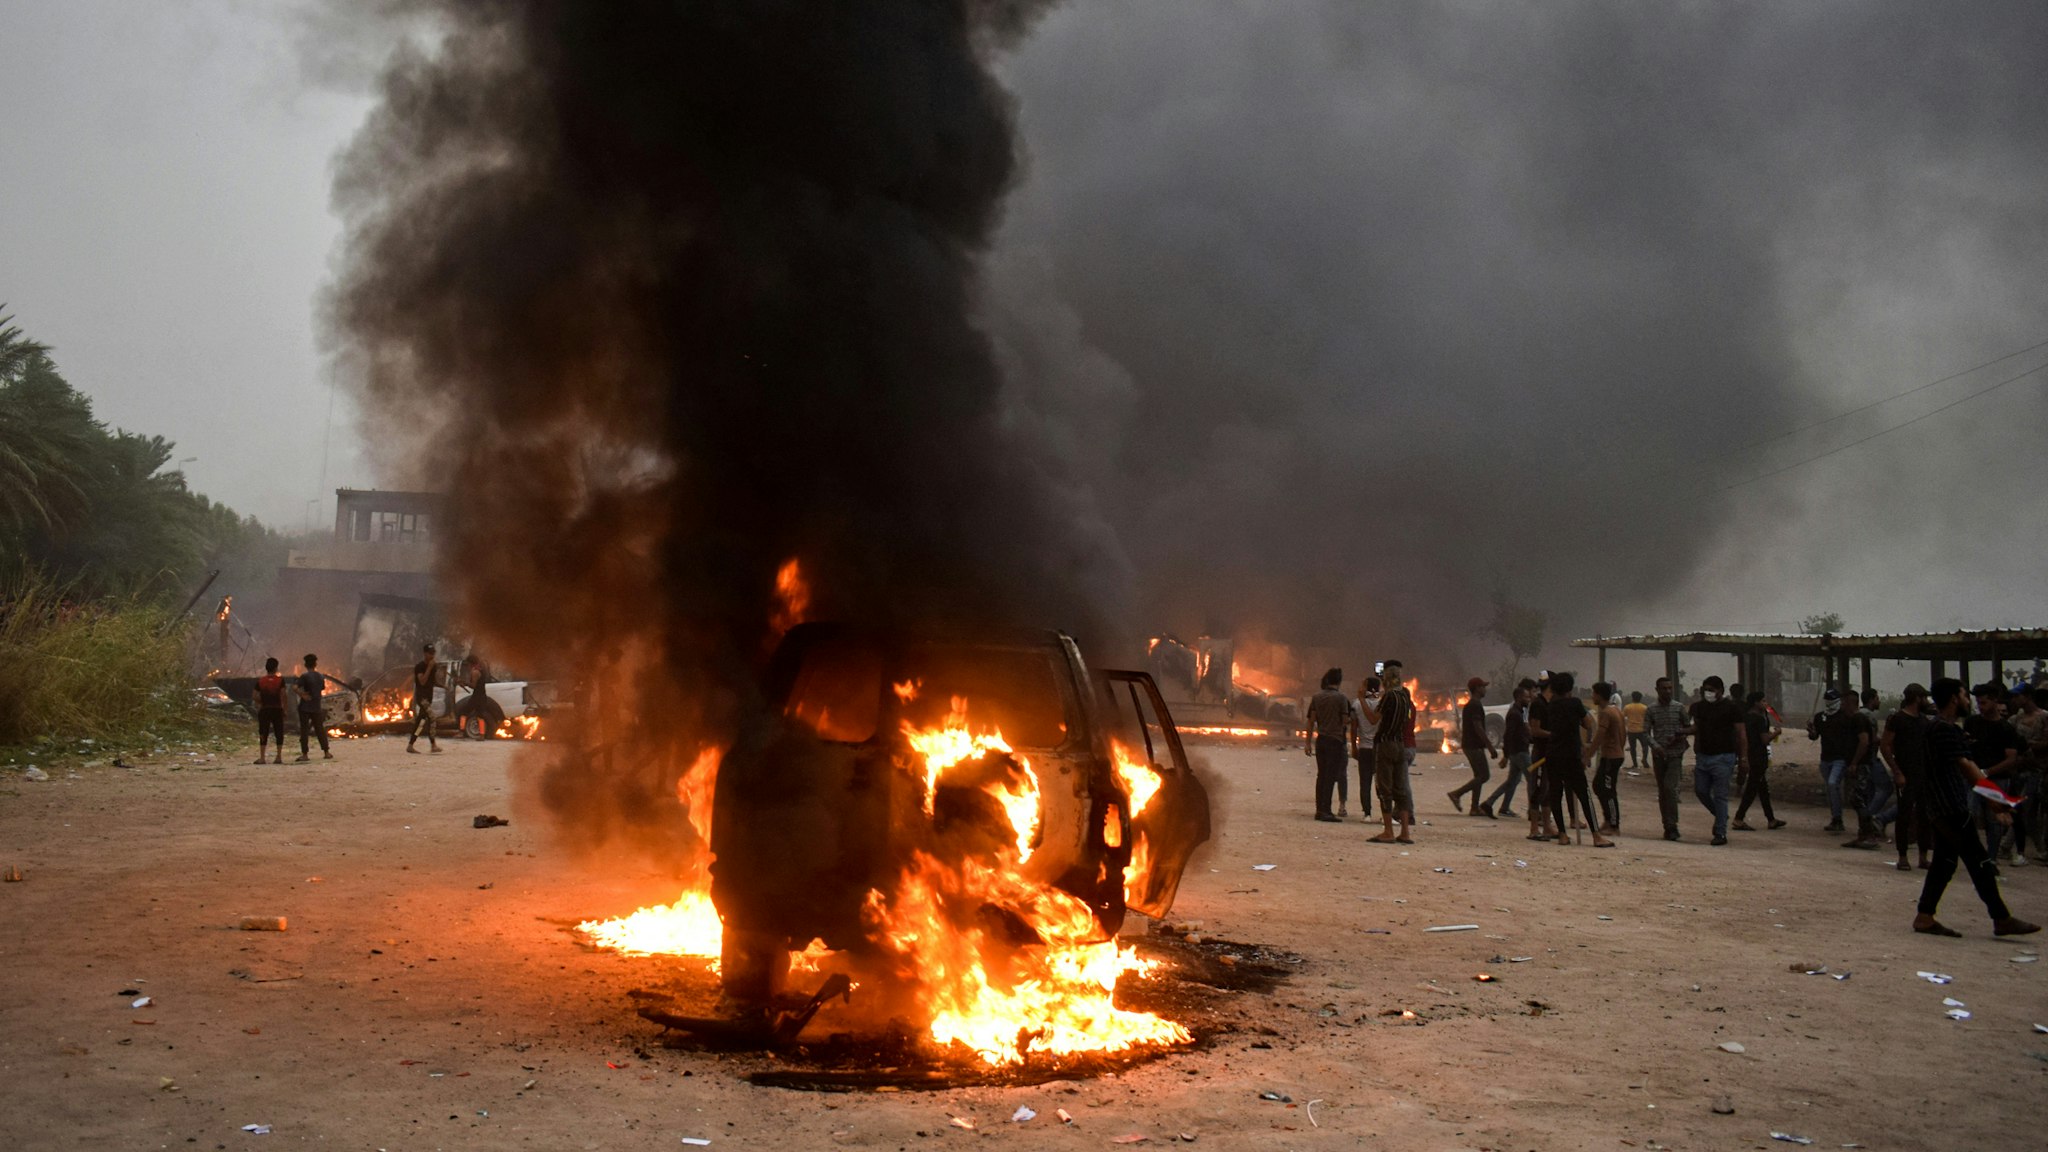 This picture taken on October 25, 2019 shows a burning car at the scene of anti-government demonstrations outside the burning local government headquarters in Nasiriyah, the capital of Iraq's southern province of Dhi Qar.